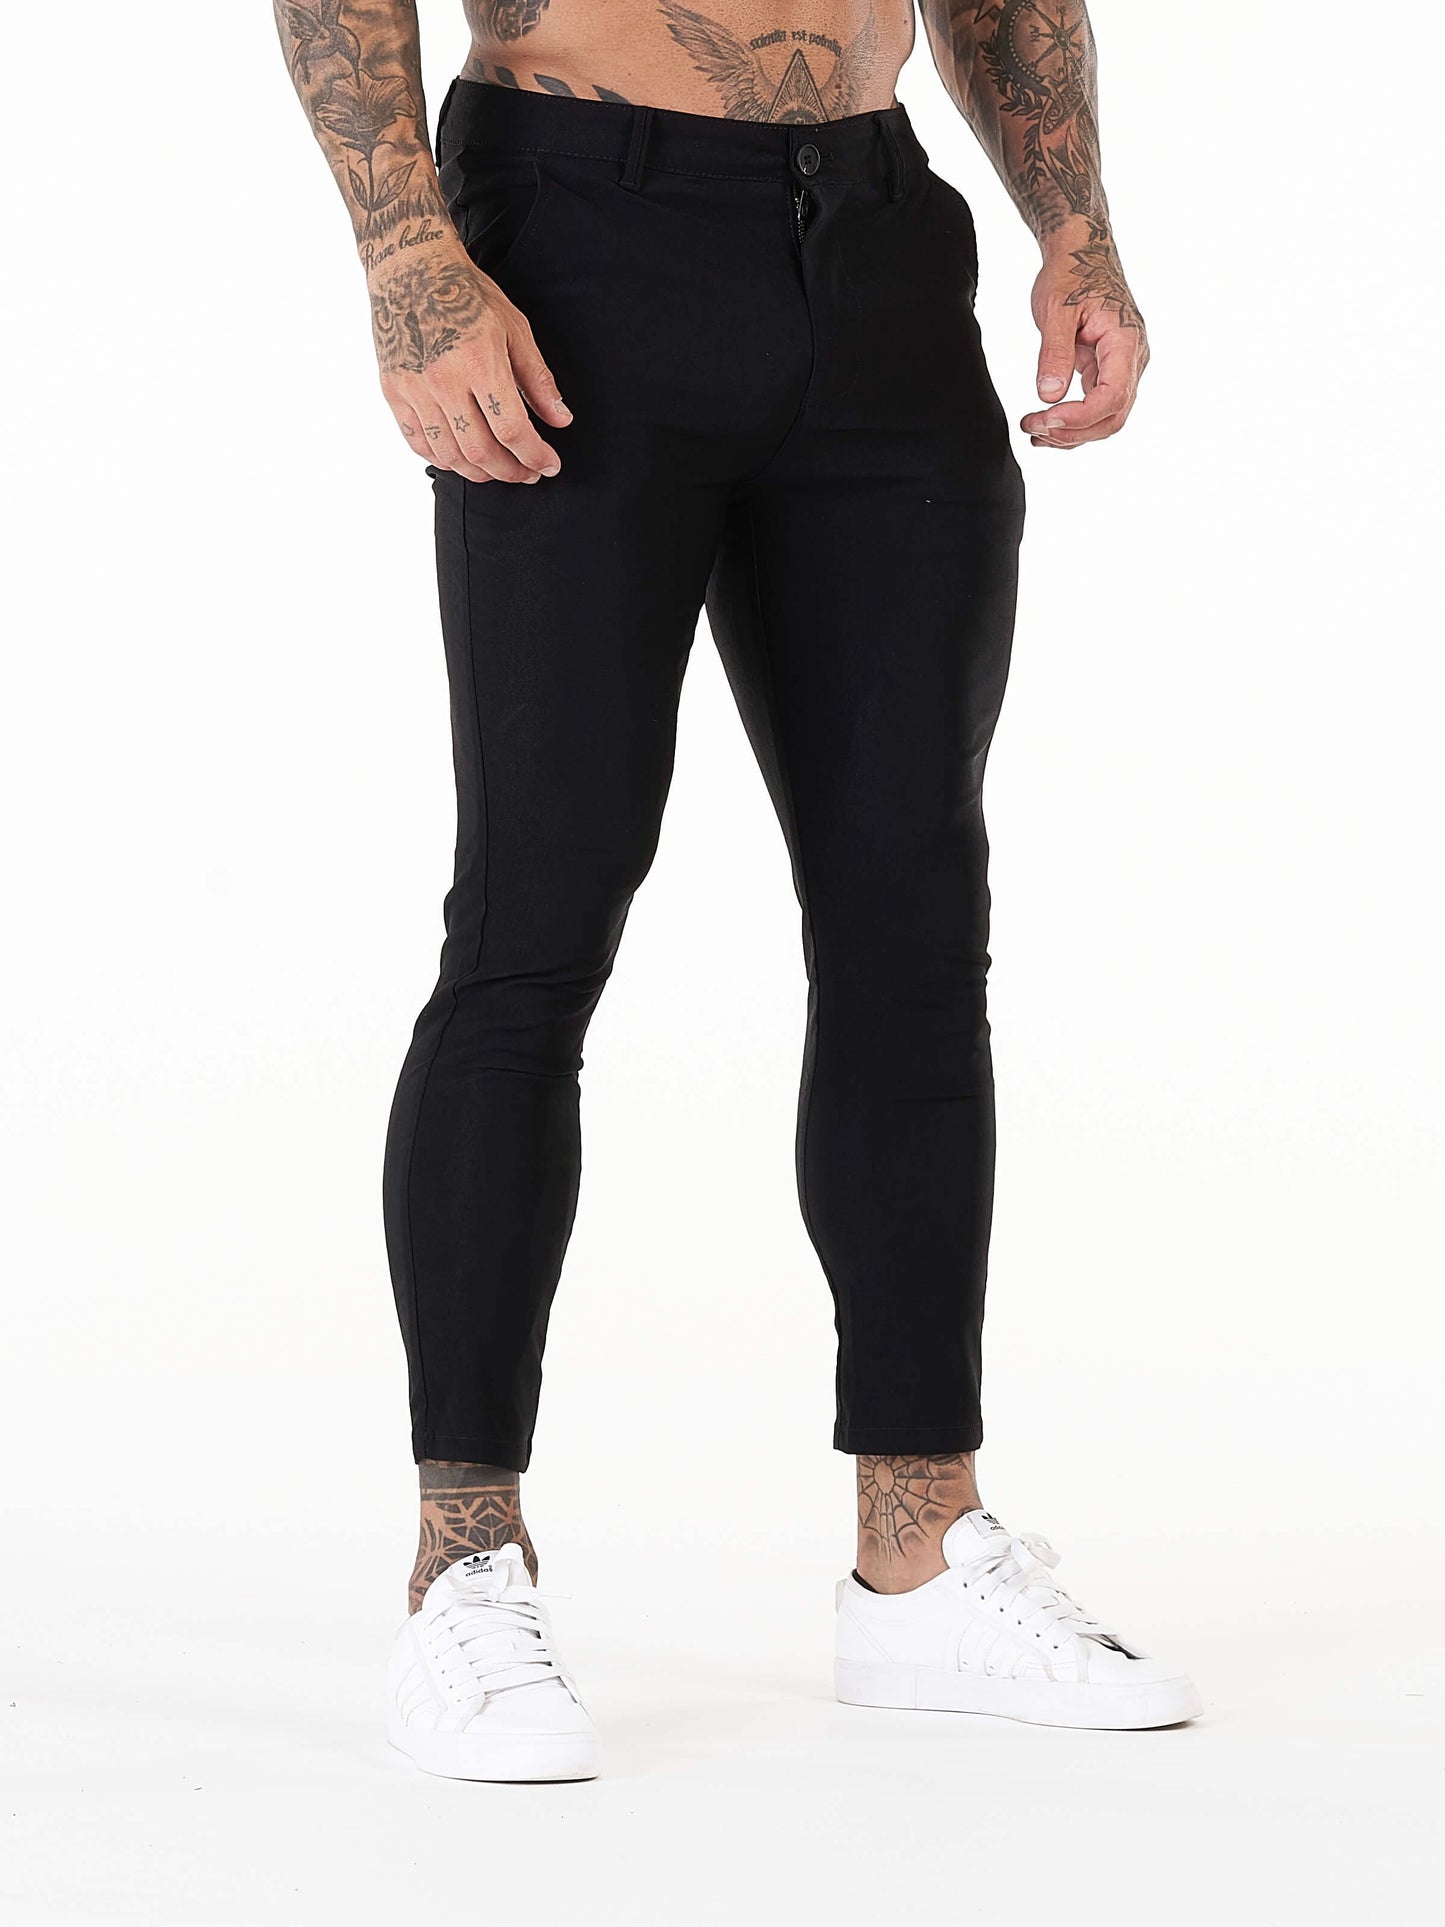 Stylish Michèllo jeans trousers and shorts in various sizes, colors, and styles for men, including class, ripped designs, and summer shorts.